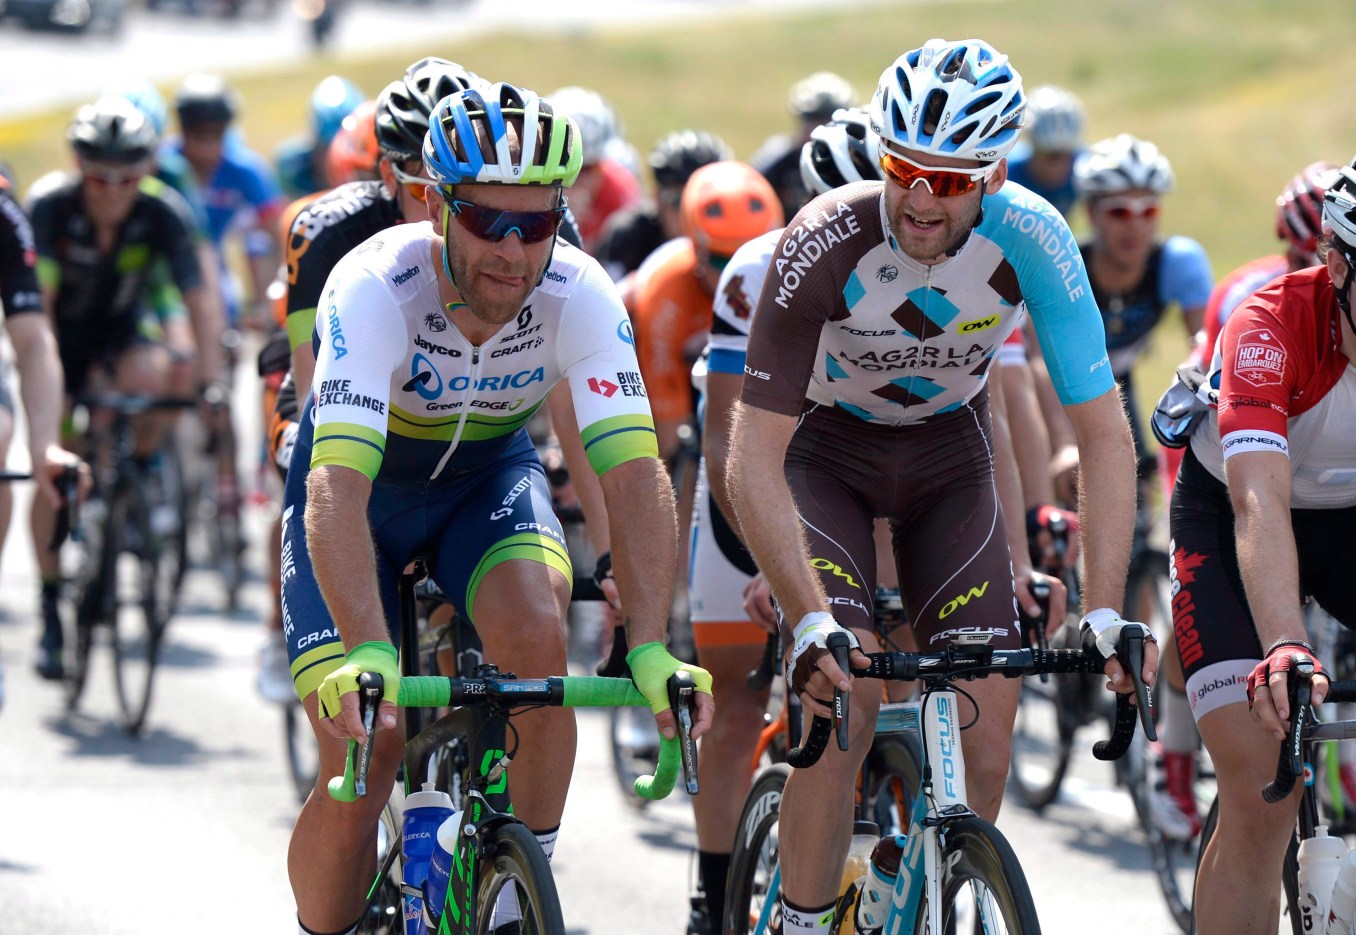 UCI WorldTour riders Svein Tuft (left) and Hugo Houle talk as they ride in the peloton during the elite and under-23 cycling race at the Canadian Road Championships, Sunday, June 26, 2016 in Ottawa. THE CANADIAN PRESS/Justin Tang